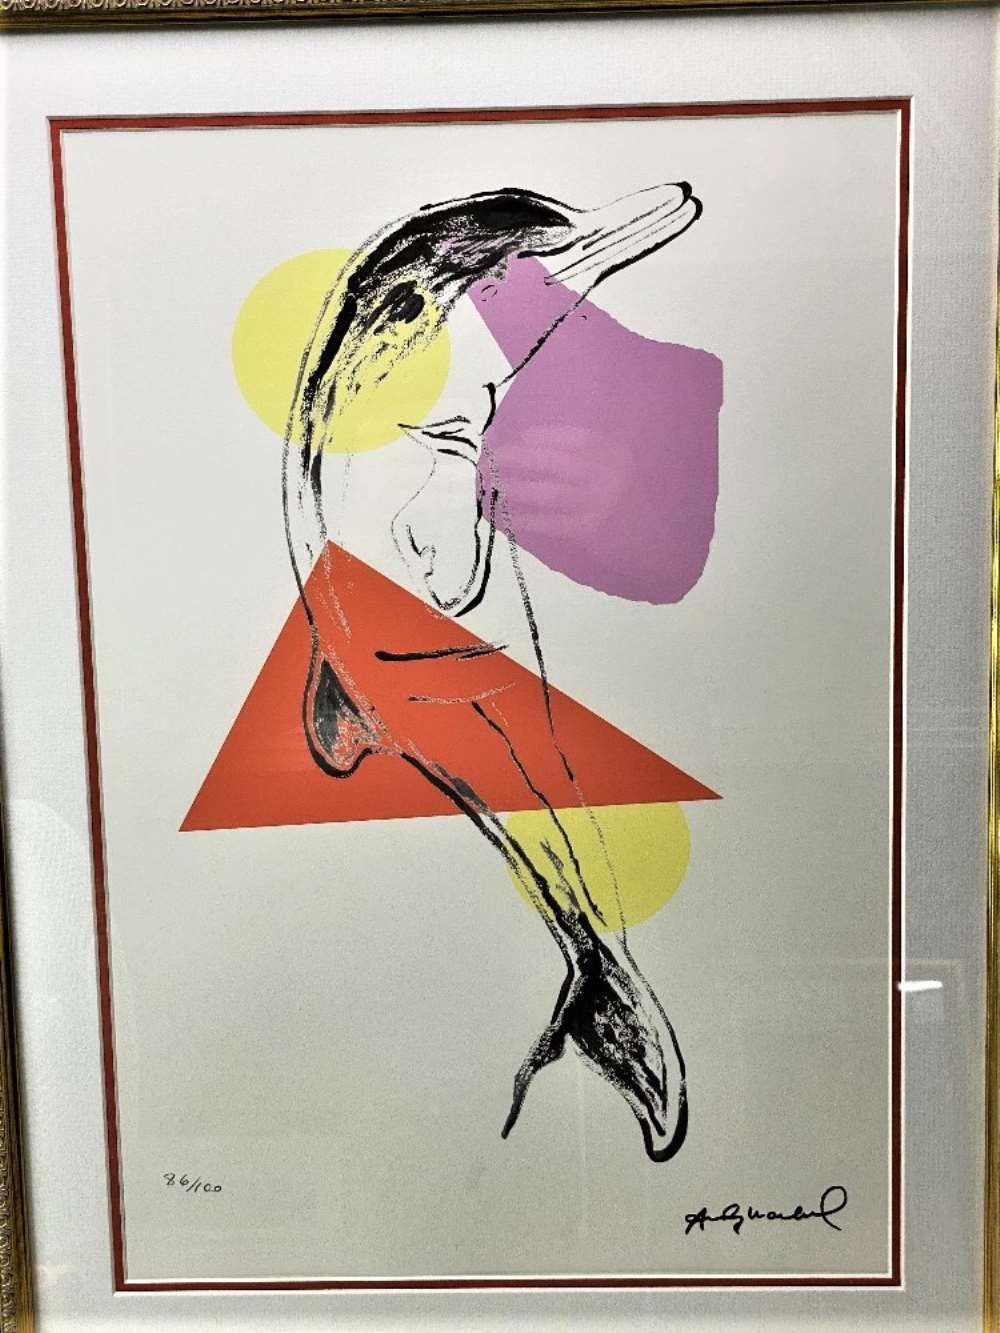 Andy Warhol (1928-1987) "Dolphin" Ltd Edition of Lithograph - Image 2 of 6